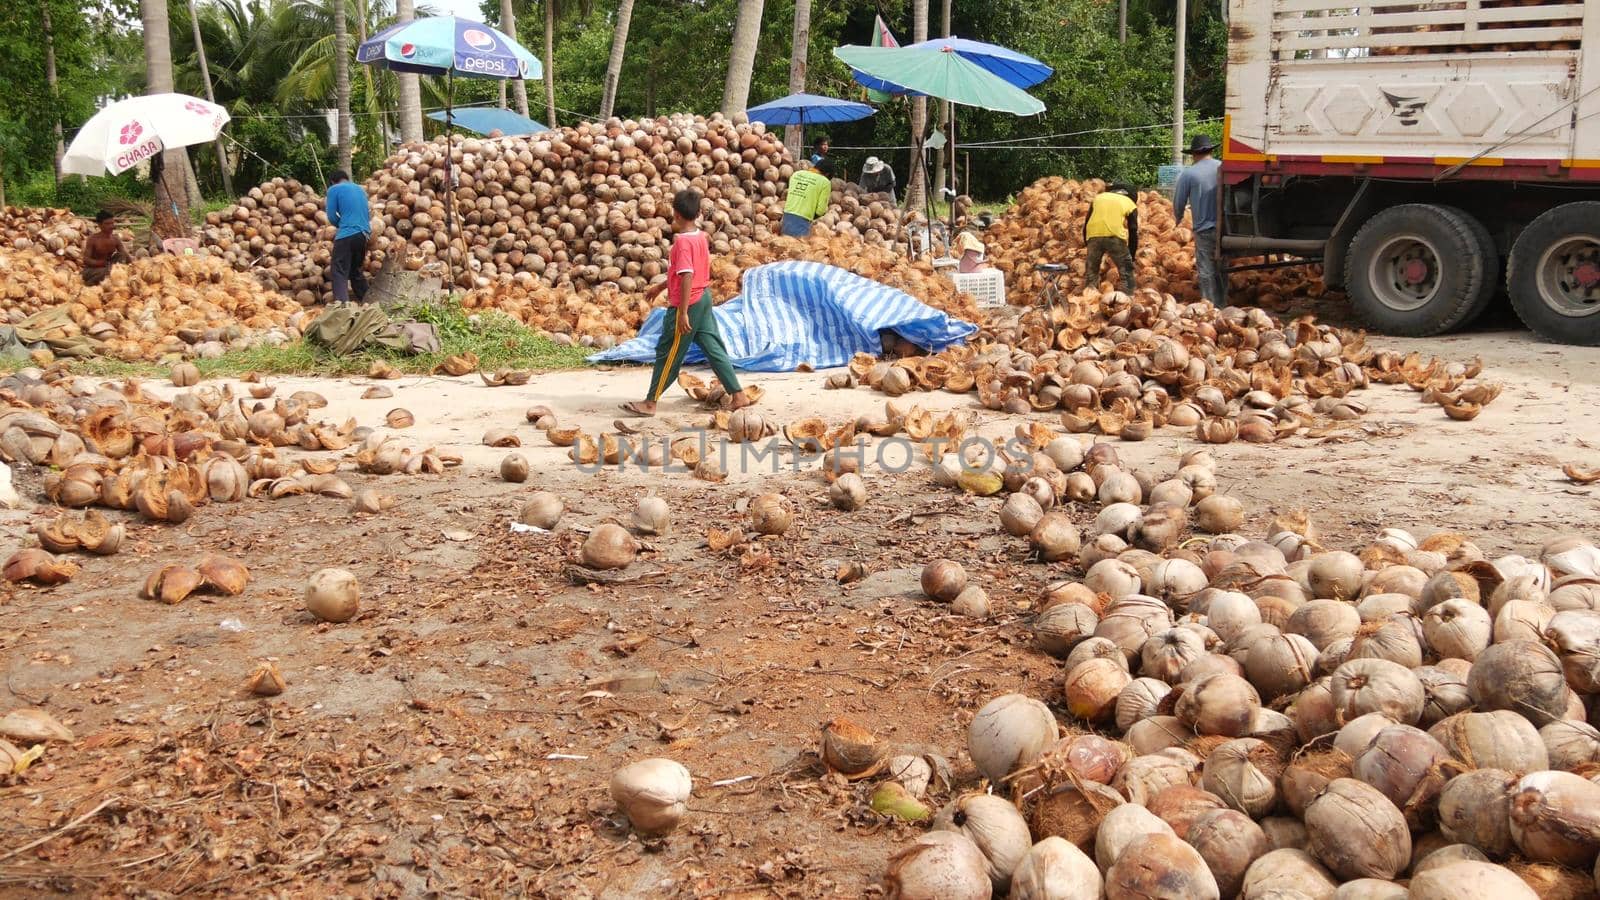 KOH SAMUI ISLAND, THAILAND - 1 JULY 2019: Asian thai men working on coconut plantation sorting nuts ready for oil and pulp production. Traditional asian agriculture and job. by DogoraSun